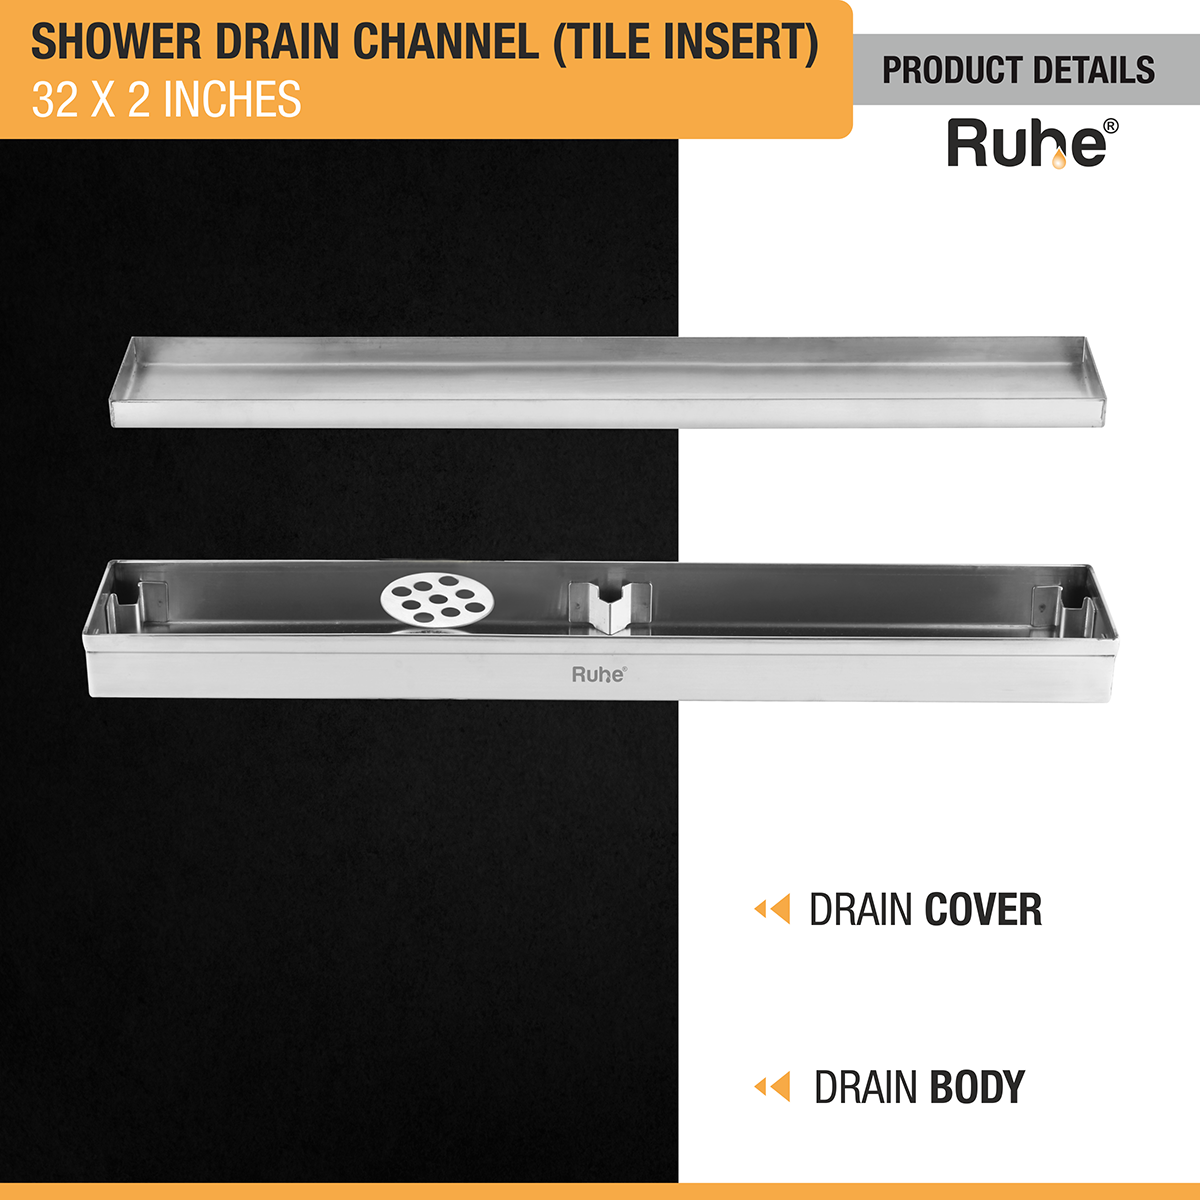 Tile Insert Shower Drain Channel (32 x 2 Inches) (304 Grade) with drain cover and drain body